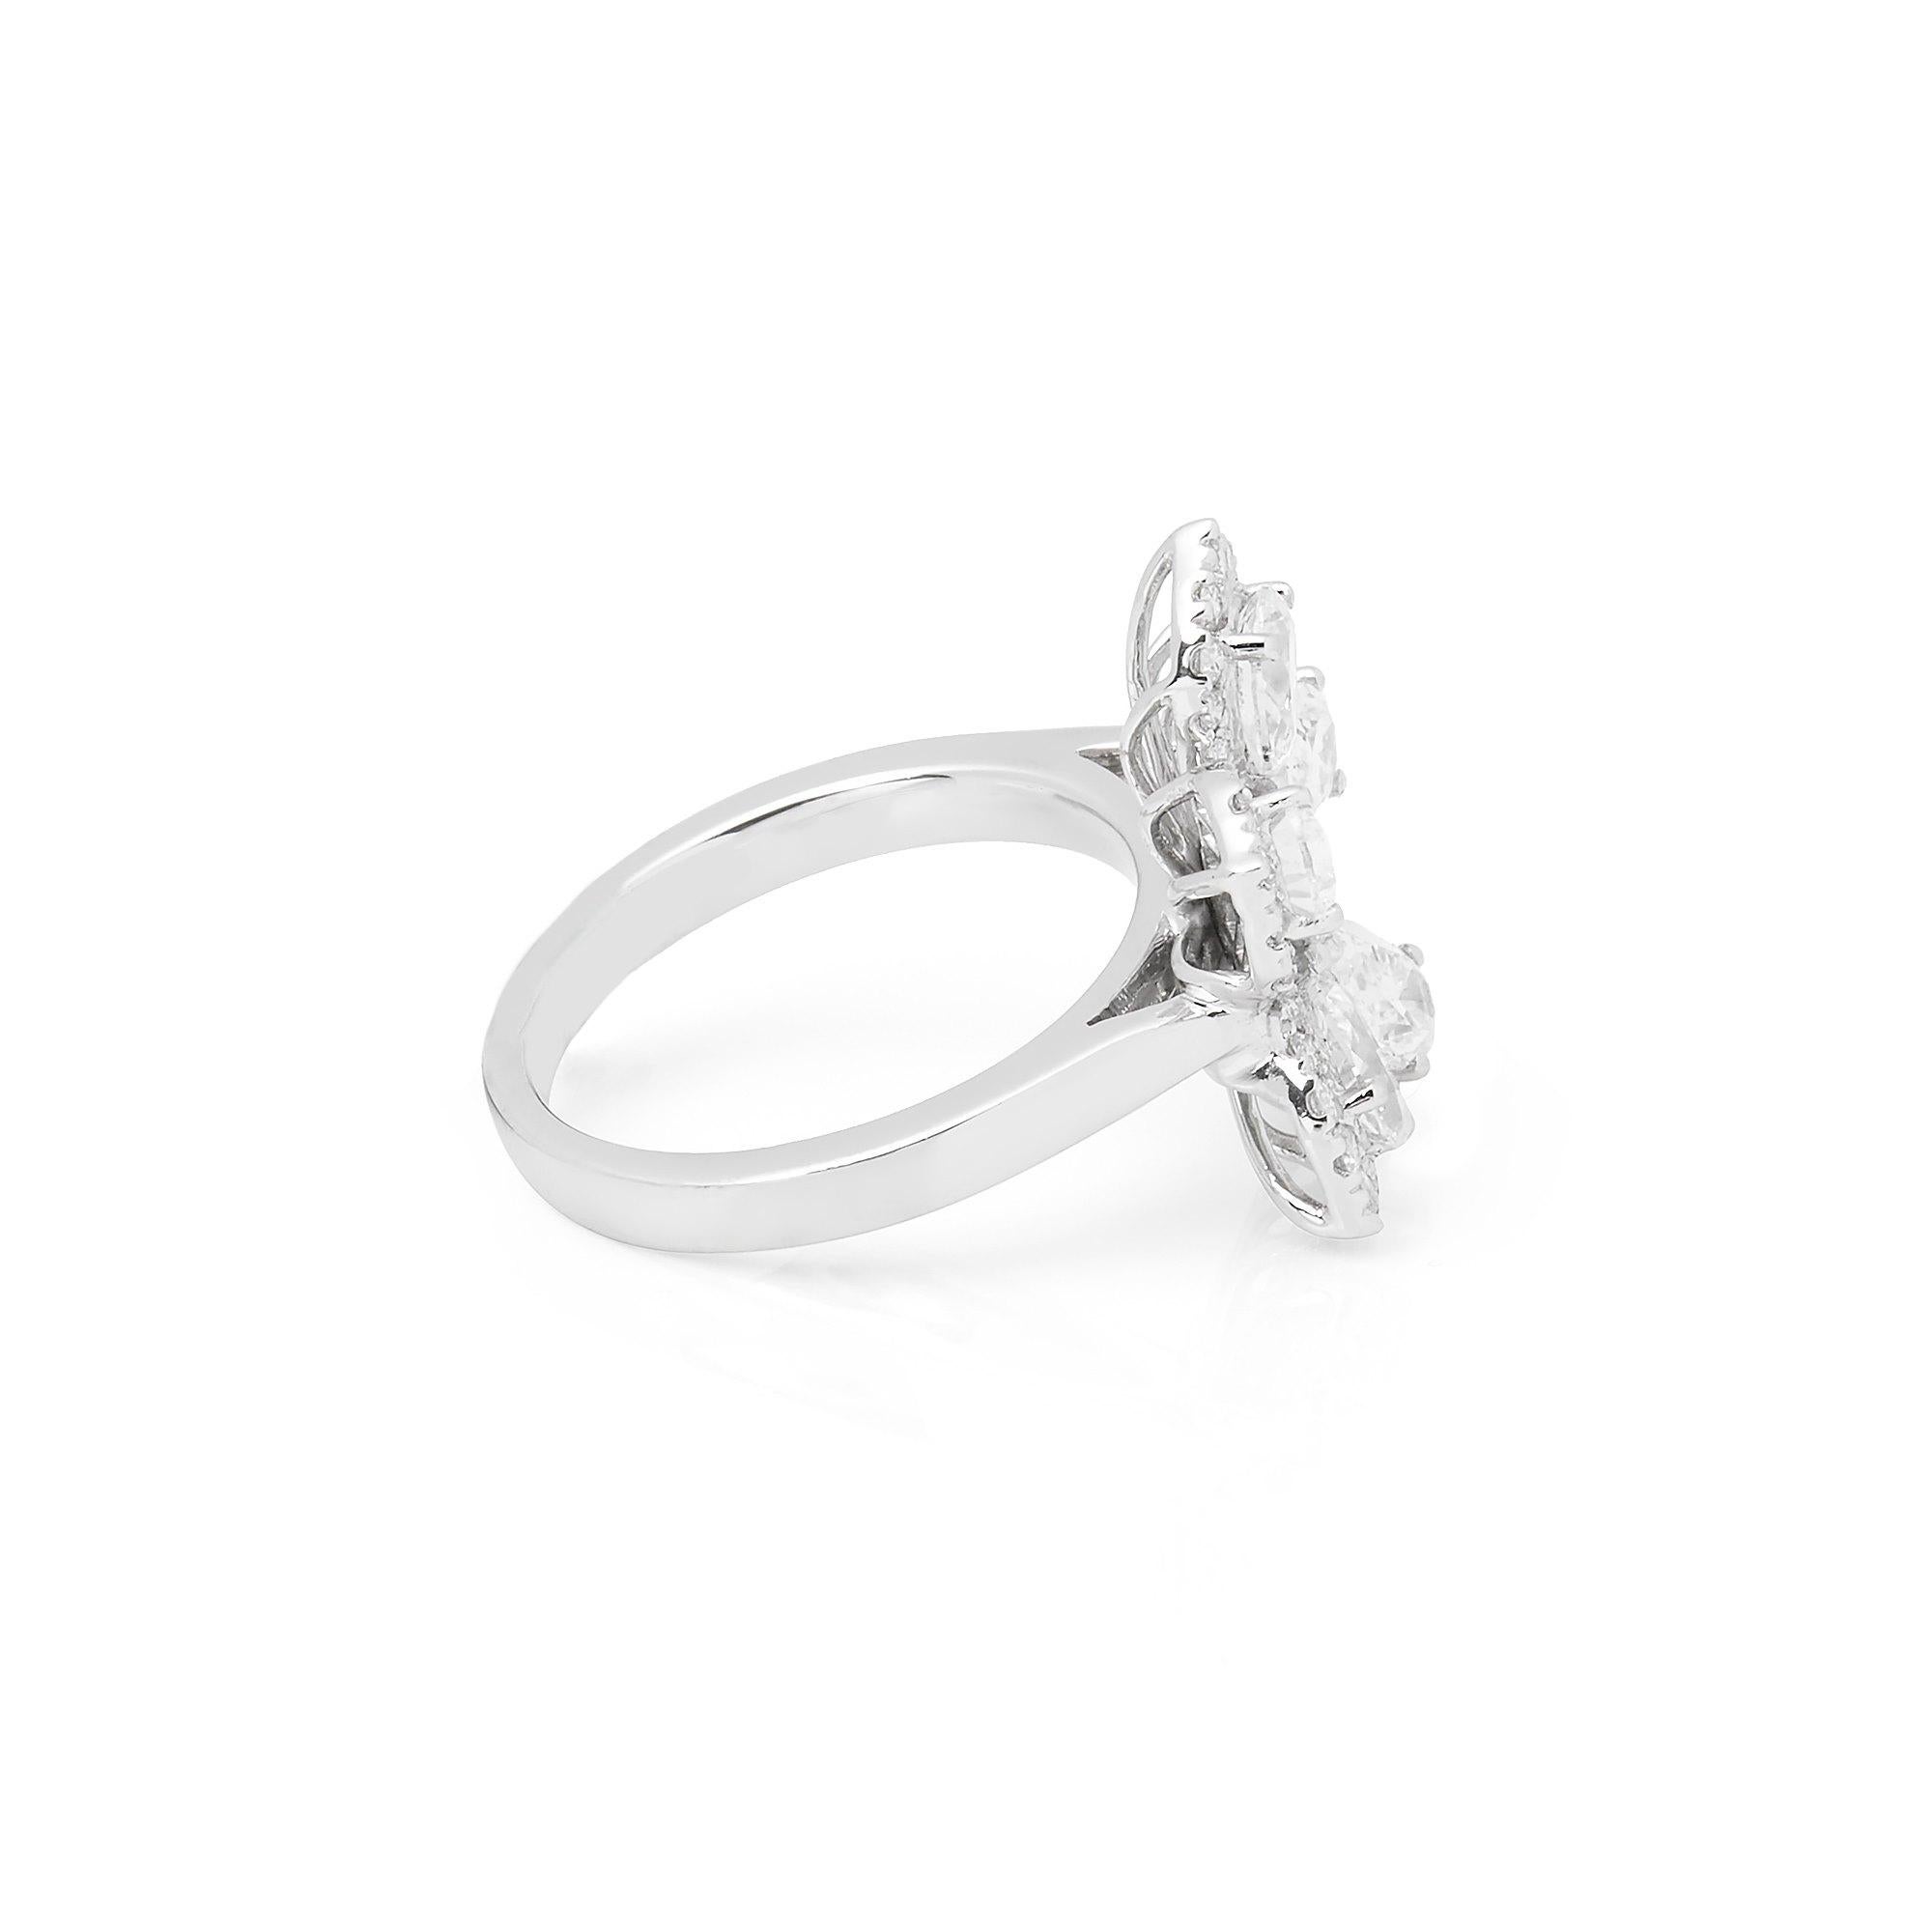 This Ring features Five Pear Cut Diamonds Totalling 1.57cts with Micro Set Round Briliant Cut Diamonds to the outer edge totaling 0.67cts. Set in Platinum. Ring size UK L1/2, EU Size 52, USA Size 6. Complete with Xupes Presentation Box. Our Xupes